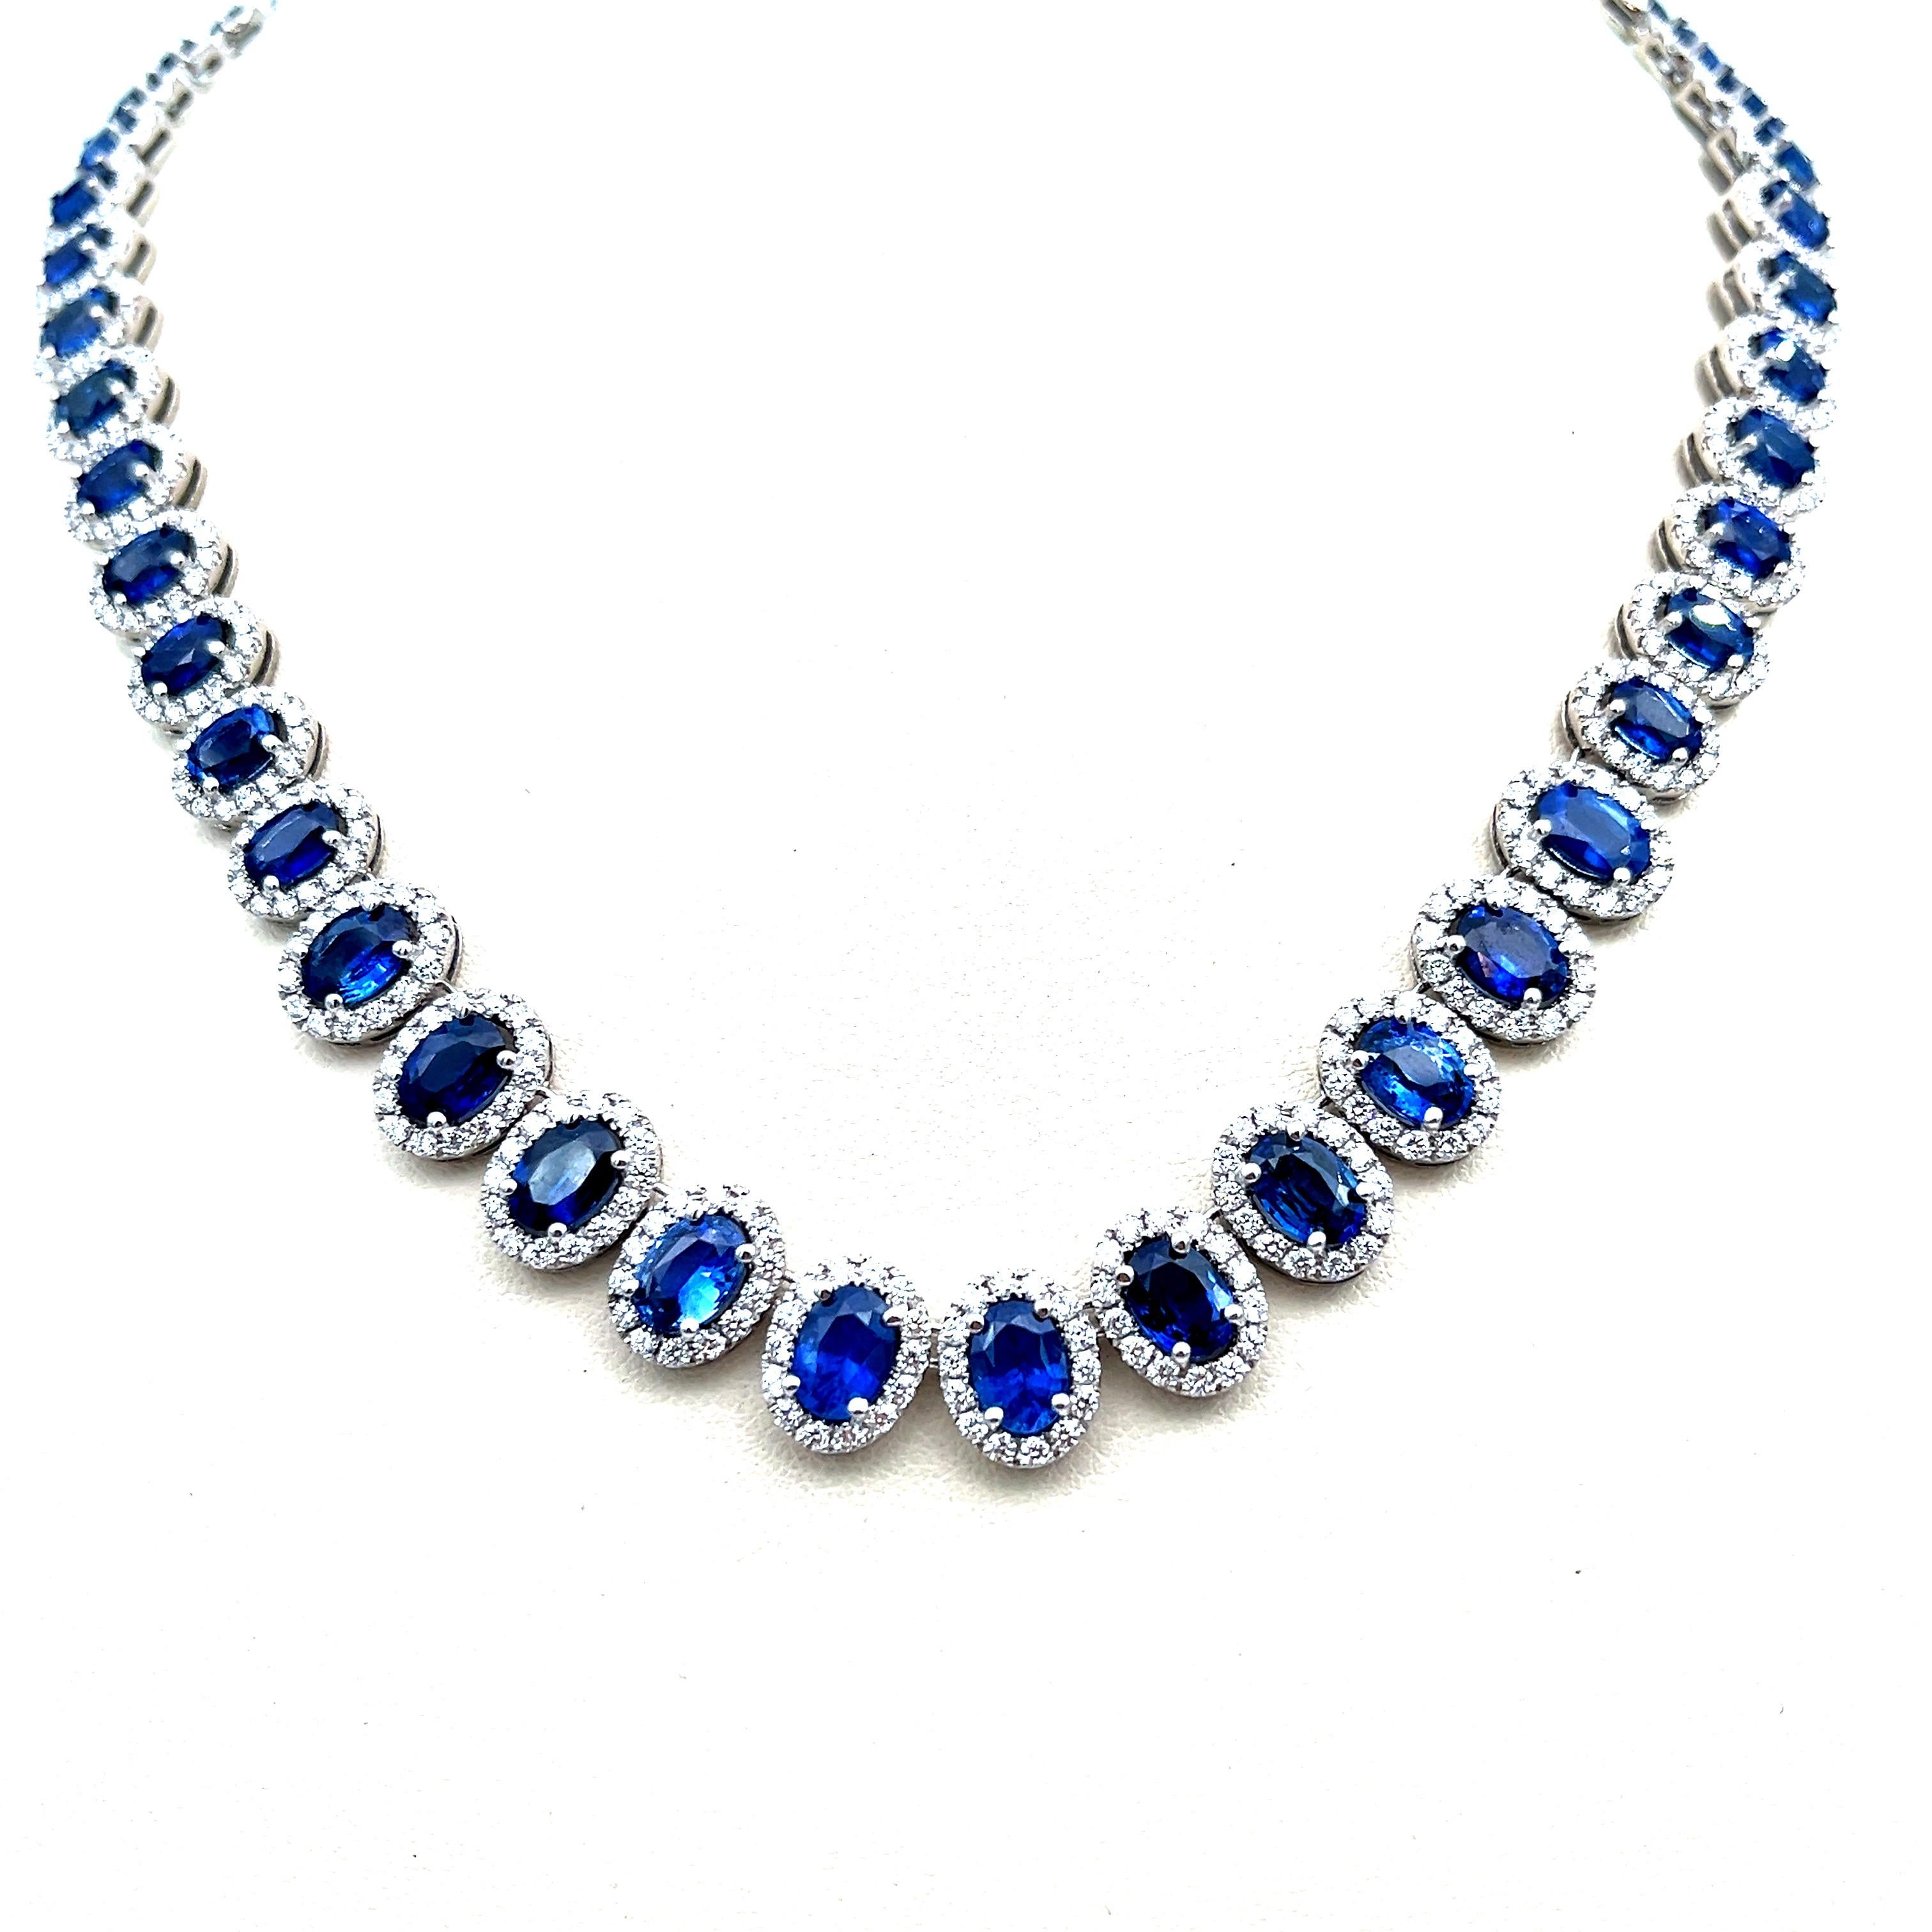 Oval Cut 37.54 ct Natural Sapphire & Diamond Necklace For Sale